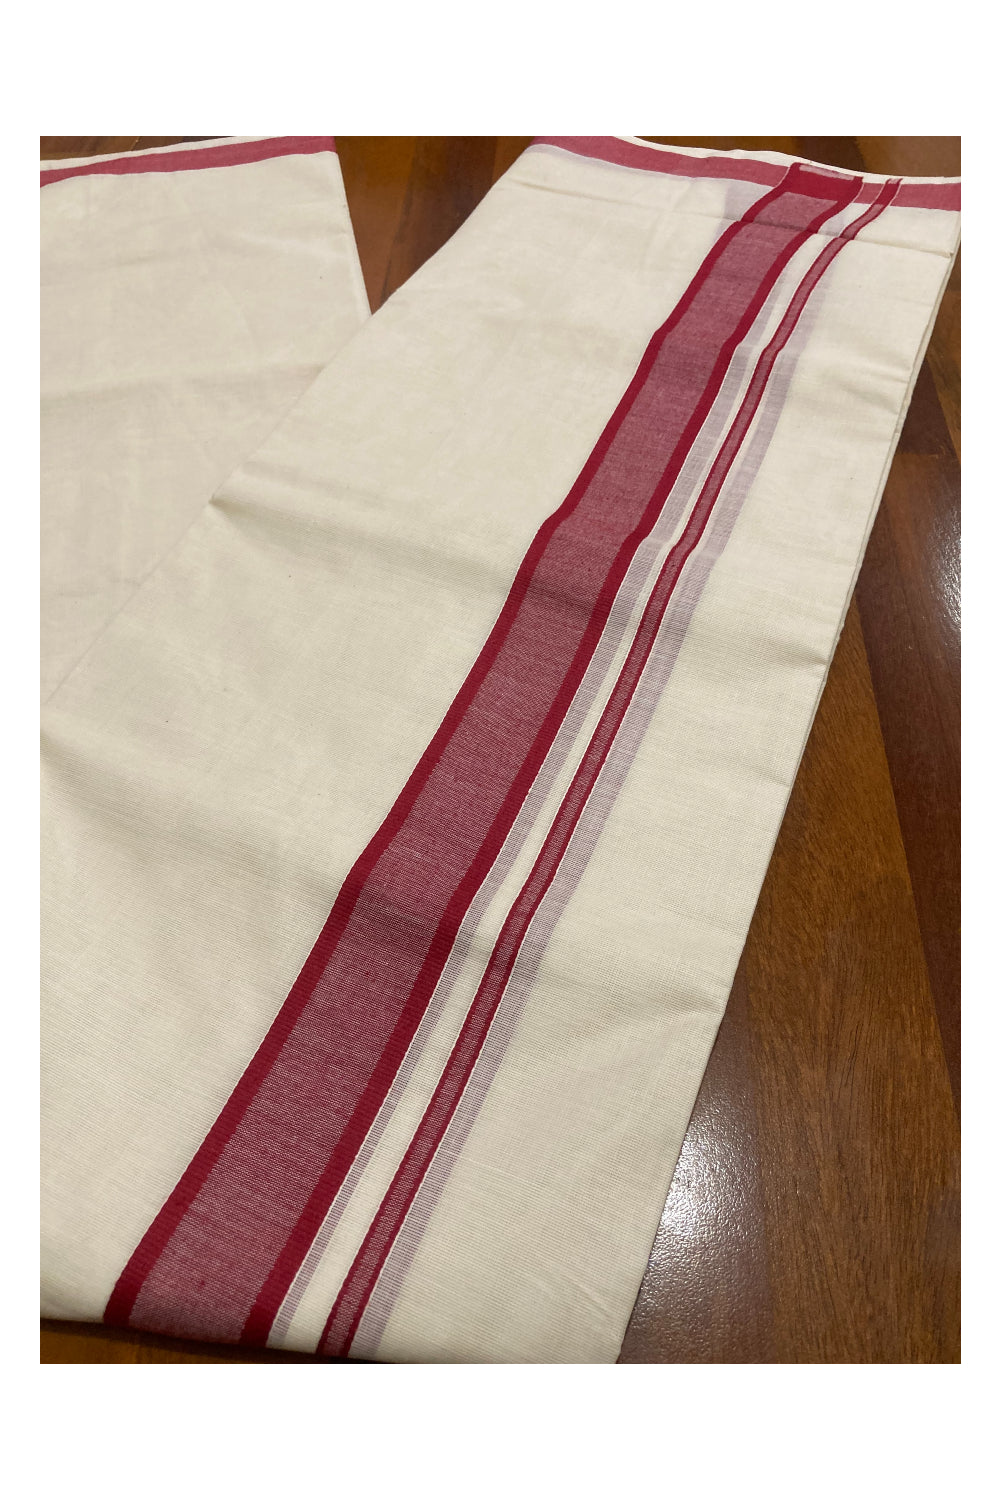 Off White Pure Cotton Double Mundu with Maroon Border (South Indian Kerala Dhoti)